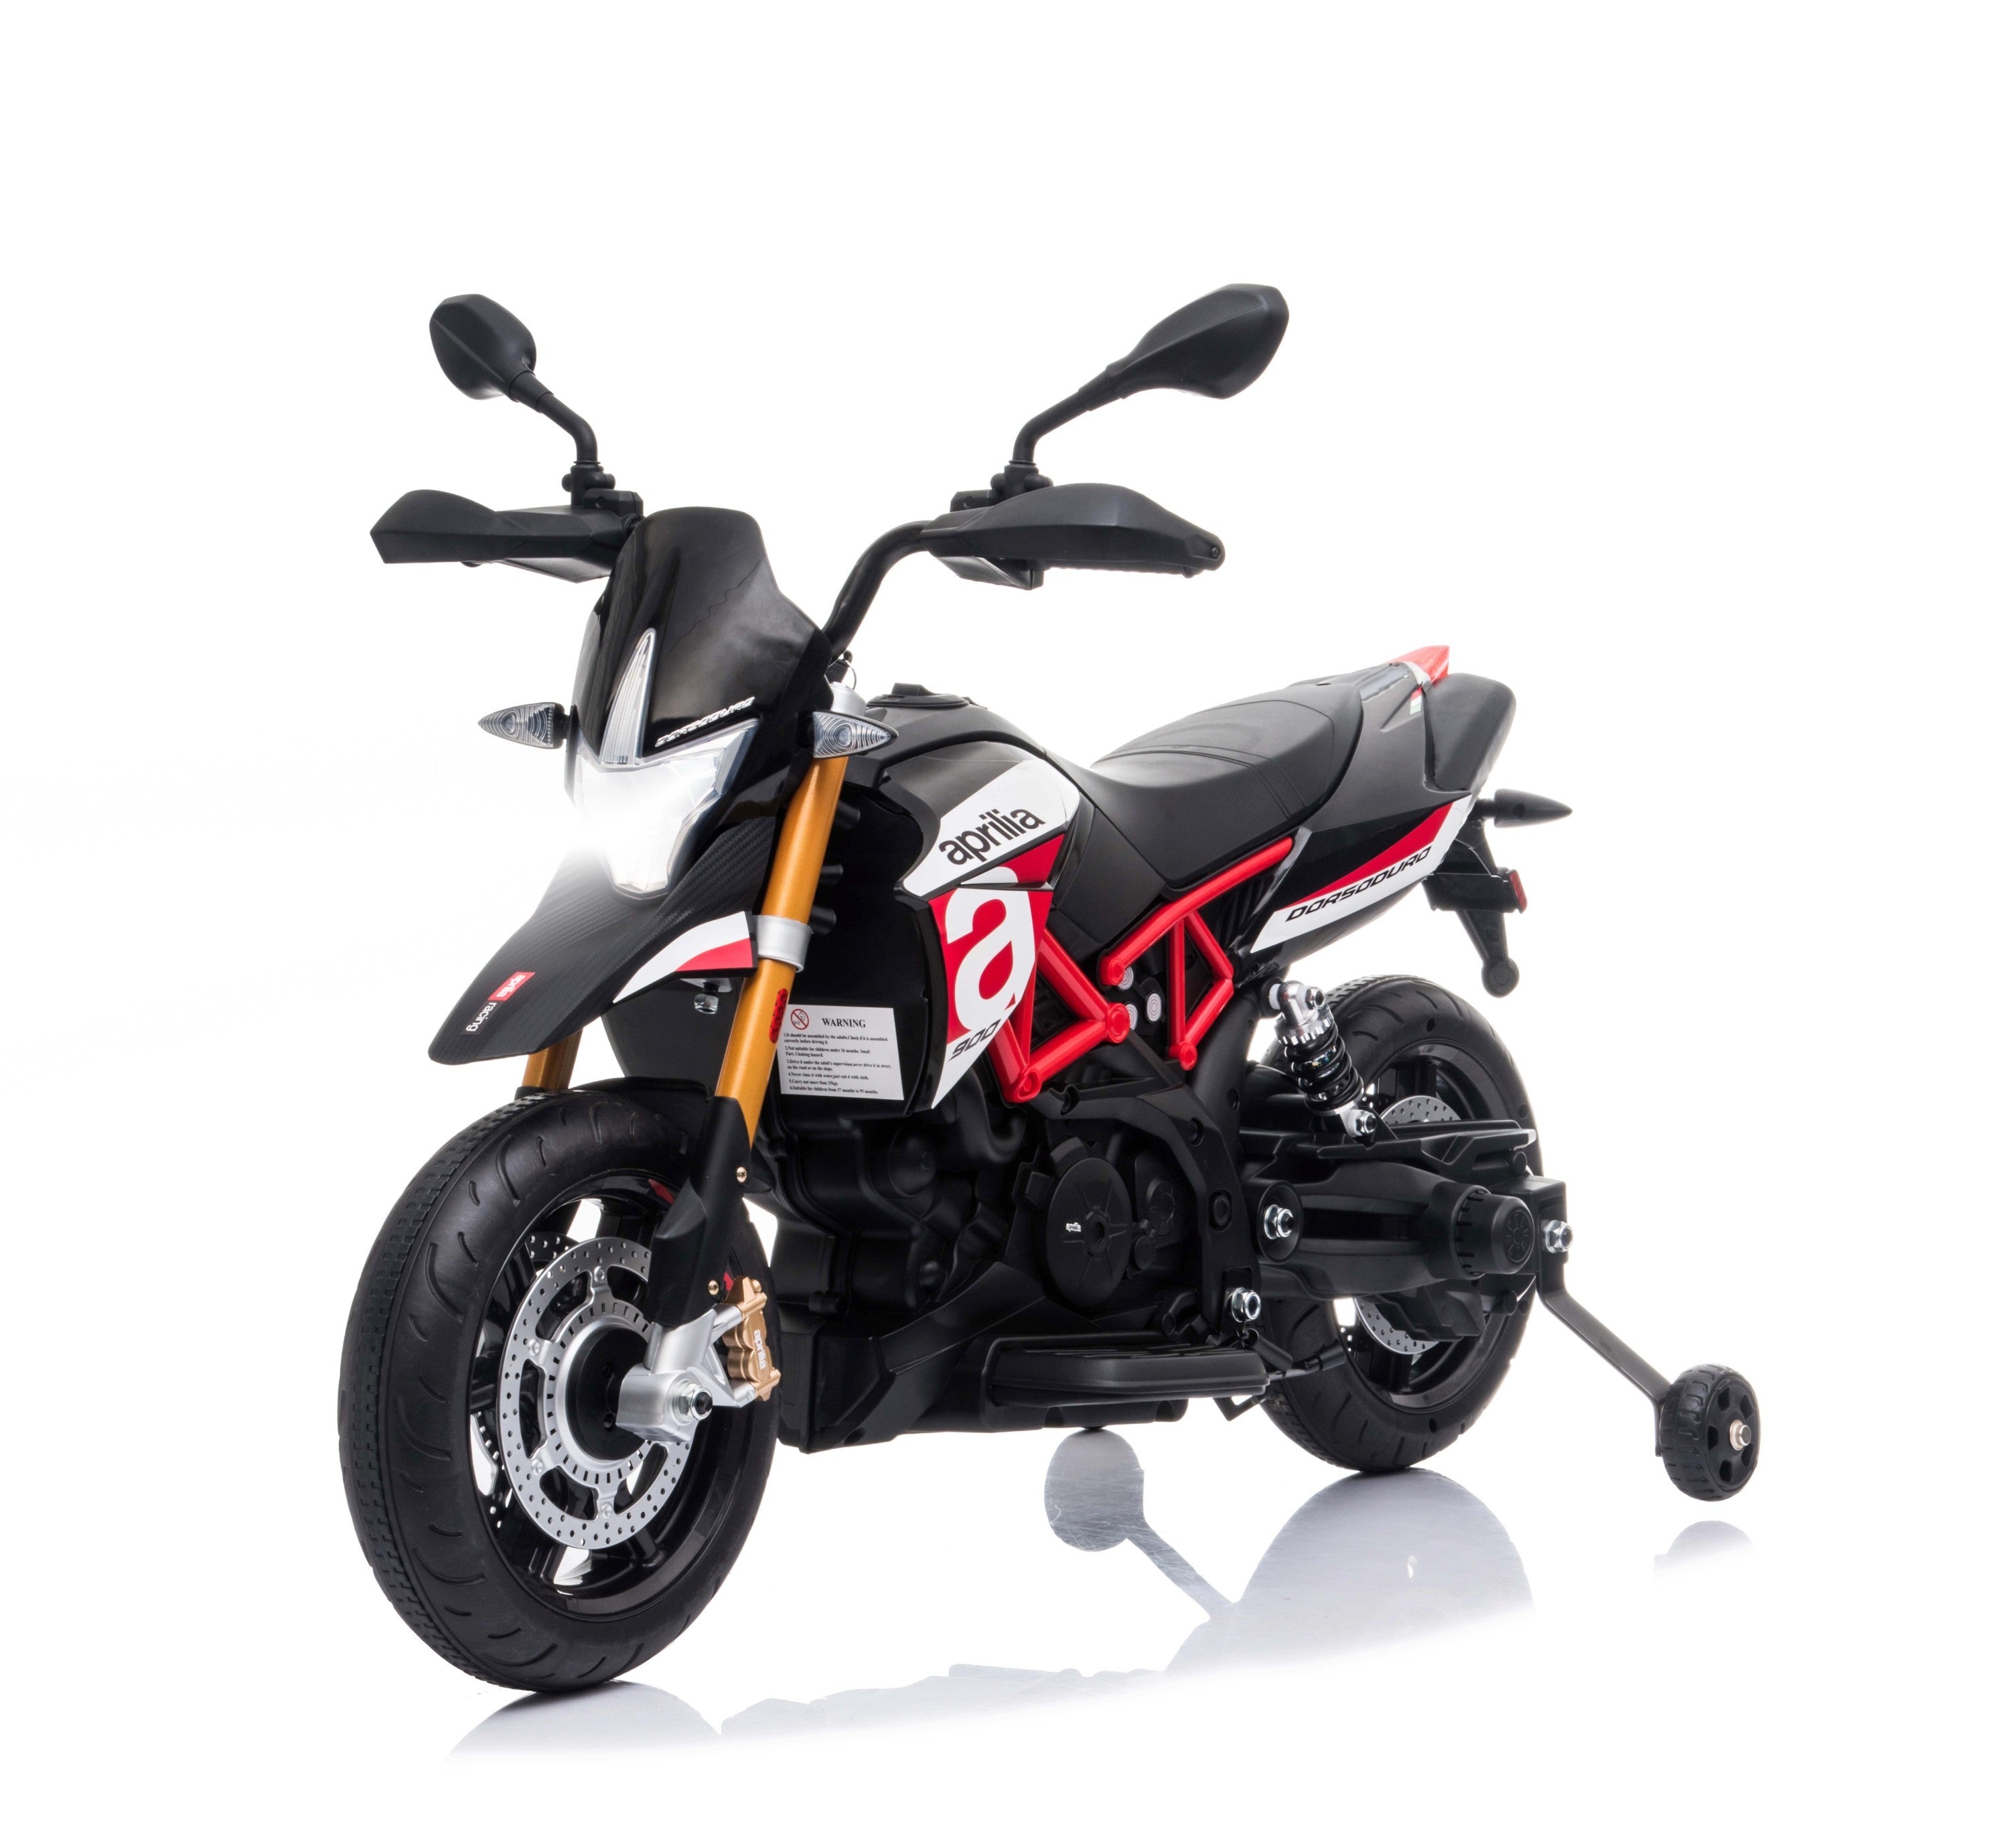 🆓🚛 Red, Licensed Aprilia Electric Motorcycle, 12V Kids Motorcycle, Ride On Toy W/Training Wheels, Spring Suspension, Led Lights, Sounds & Music, Mp3, Battery Powered Dirt Bike for Boys & Girls